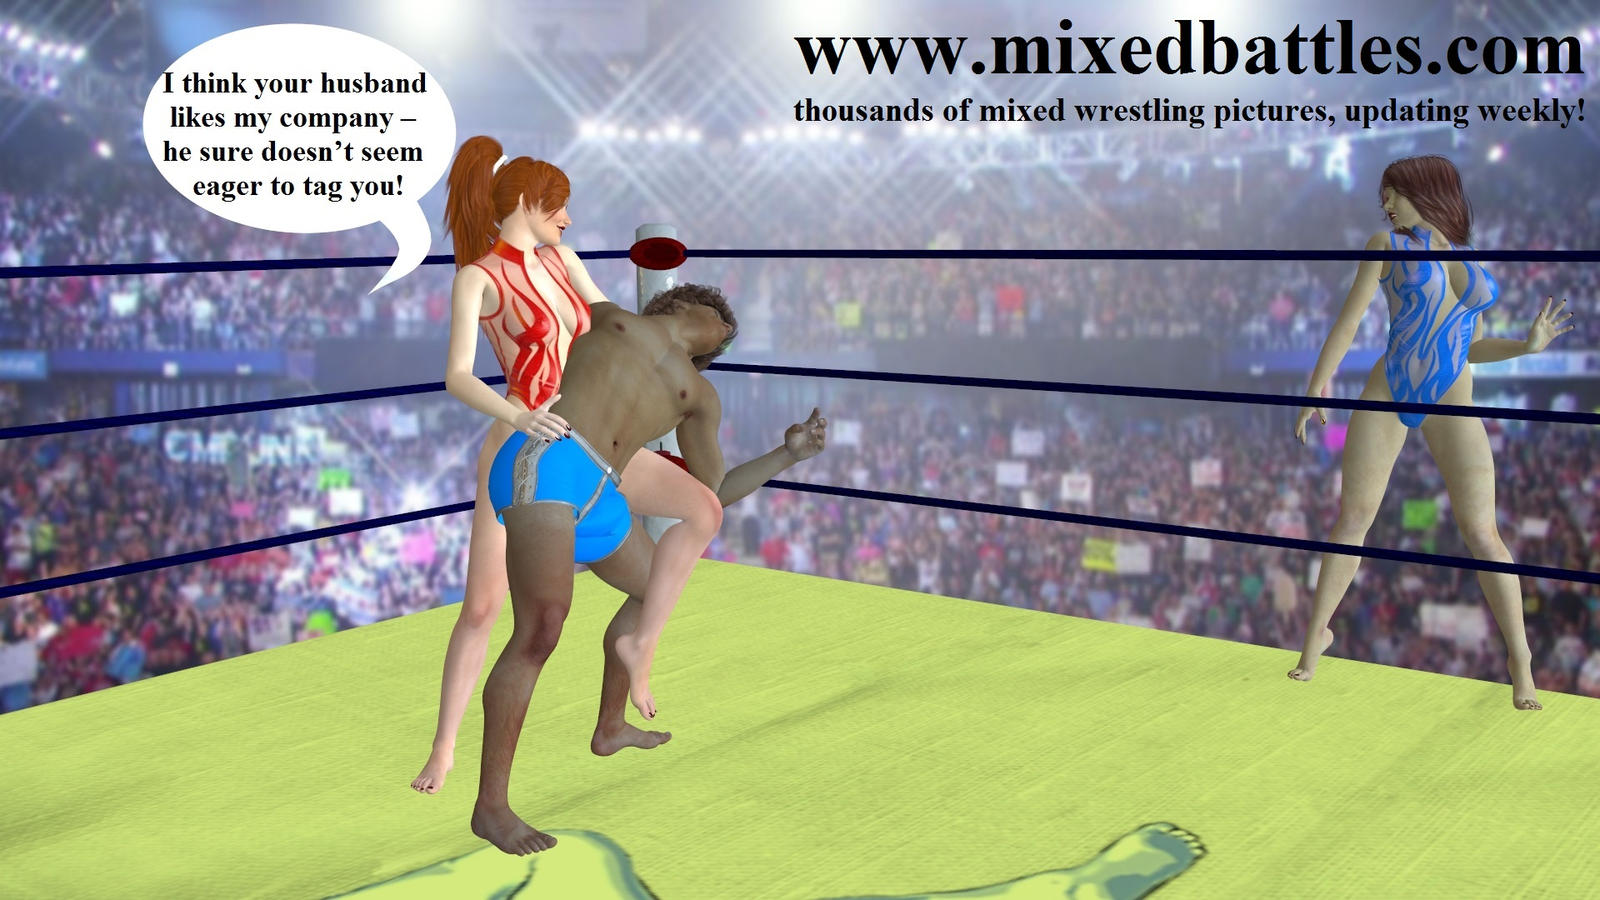 Leotard Clad Girls In Mixed Wrestling Page 2 Freeones Board The